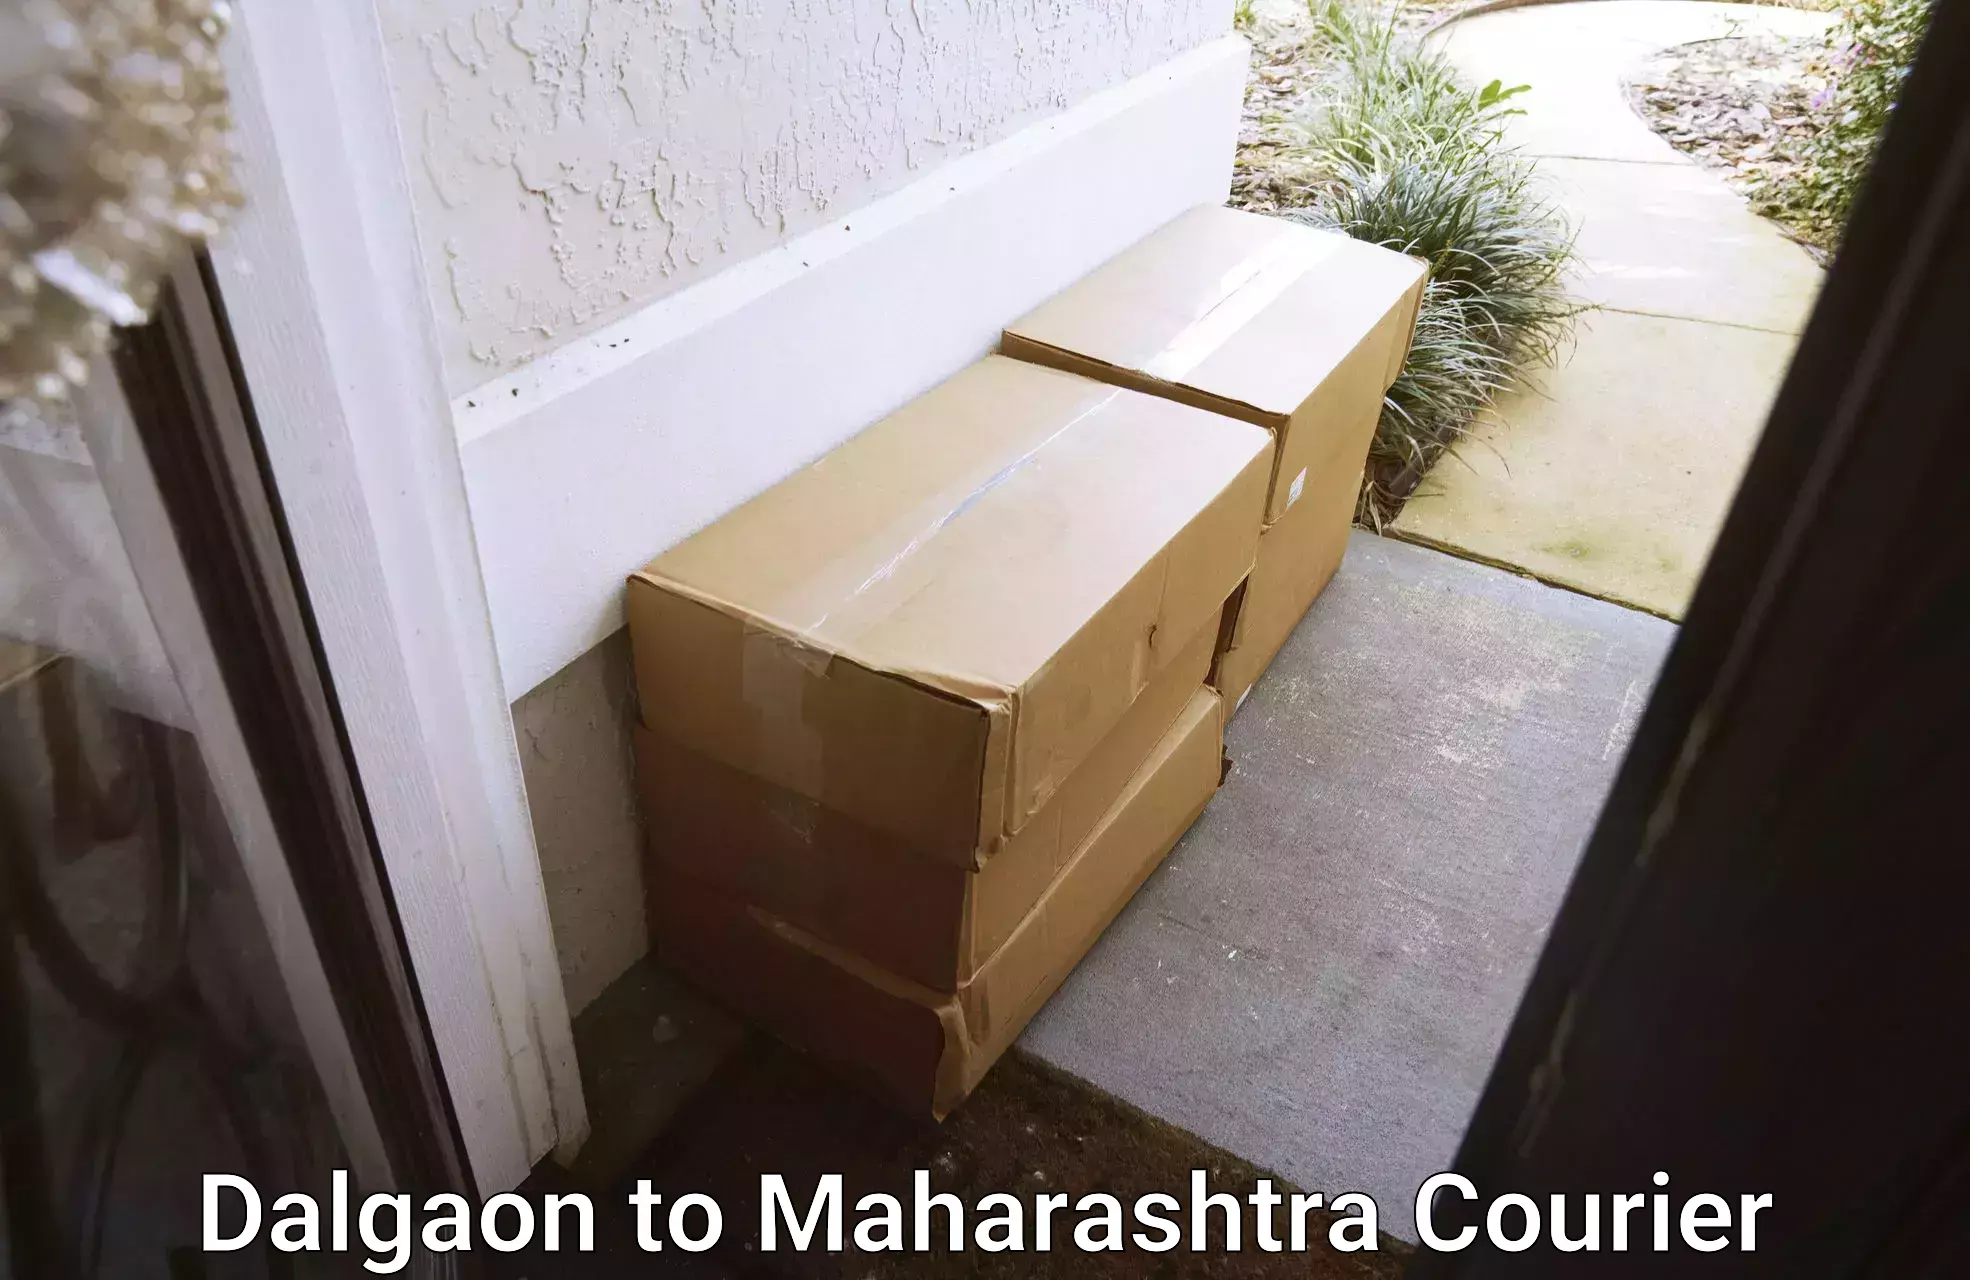 Global courier networks Dalgaon to Alephata